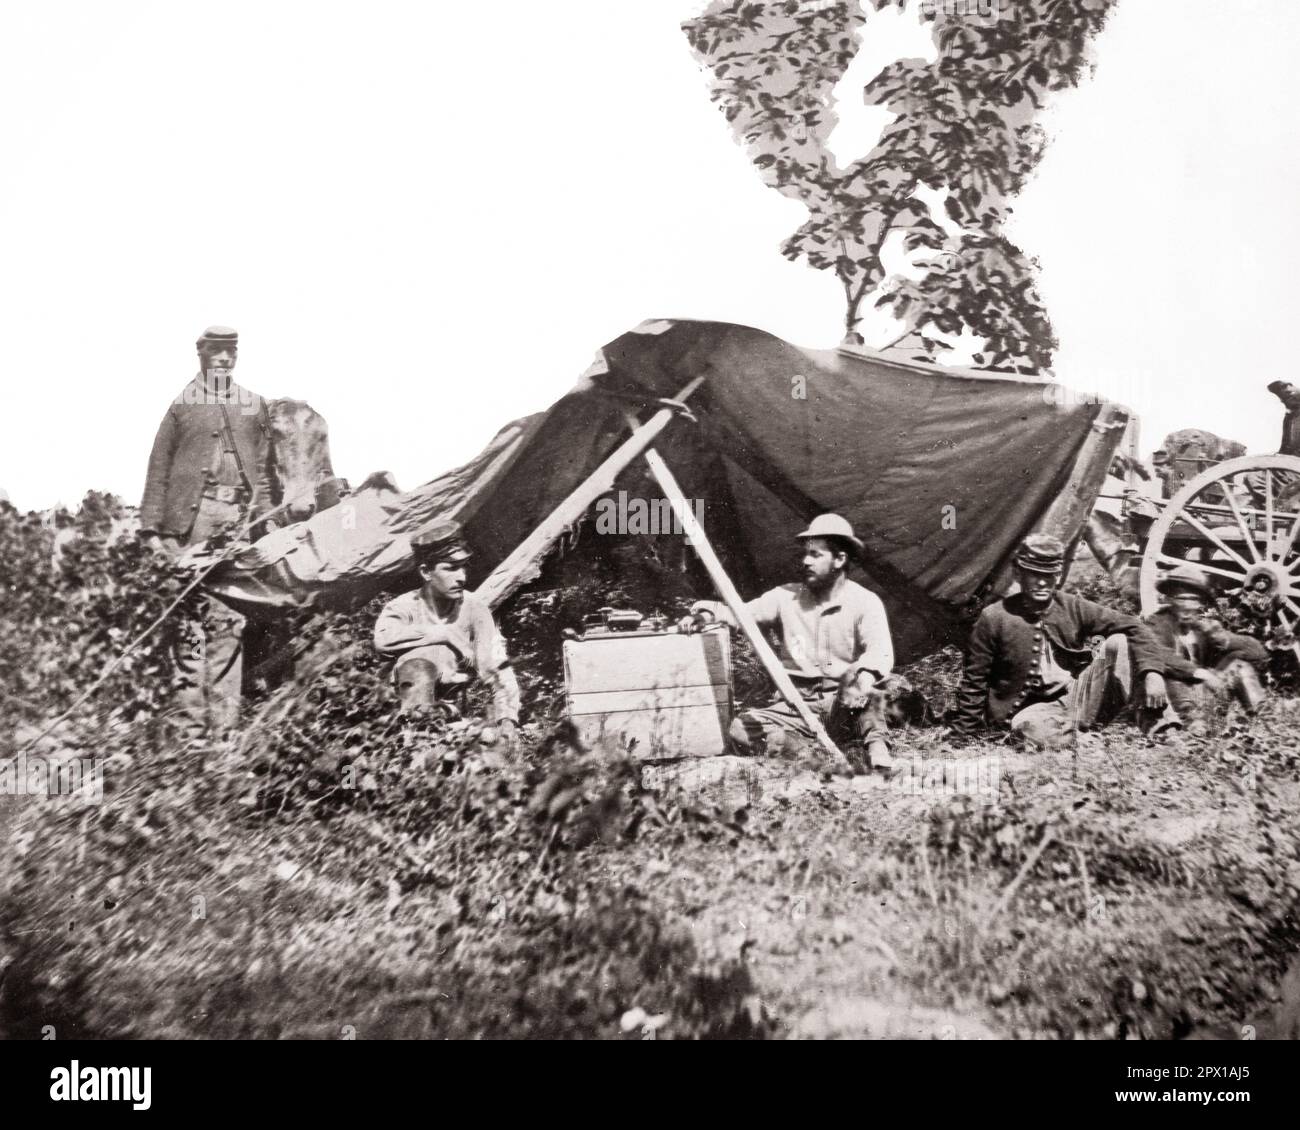 1860s FOUR MEN UNION SOLDIERS FIELD TELEGRAPH OPERATORS UNDER TEMPORARY SHELTER TENT DURING AMERICAN CIVIL WAR  - h8894 SPL001 HARS UNION EXTERIOR INNOVATION OPERATORS UNIFORMS CONNECTION CONCEPTUAL 1860s TEMPORARY MID-ADULT MID-ADULT MAN PRECISION TELEGRAPH TOGETHERNESS YOUNG ADULT MAN AMERICAN CIVIL WAR BATTLES BLACK AND WHITE CAUCASIAN ETHNICITY CIVIL WAR CONFLICTS DURING OLD FASHIONED Stock Photo